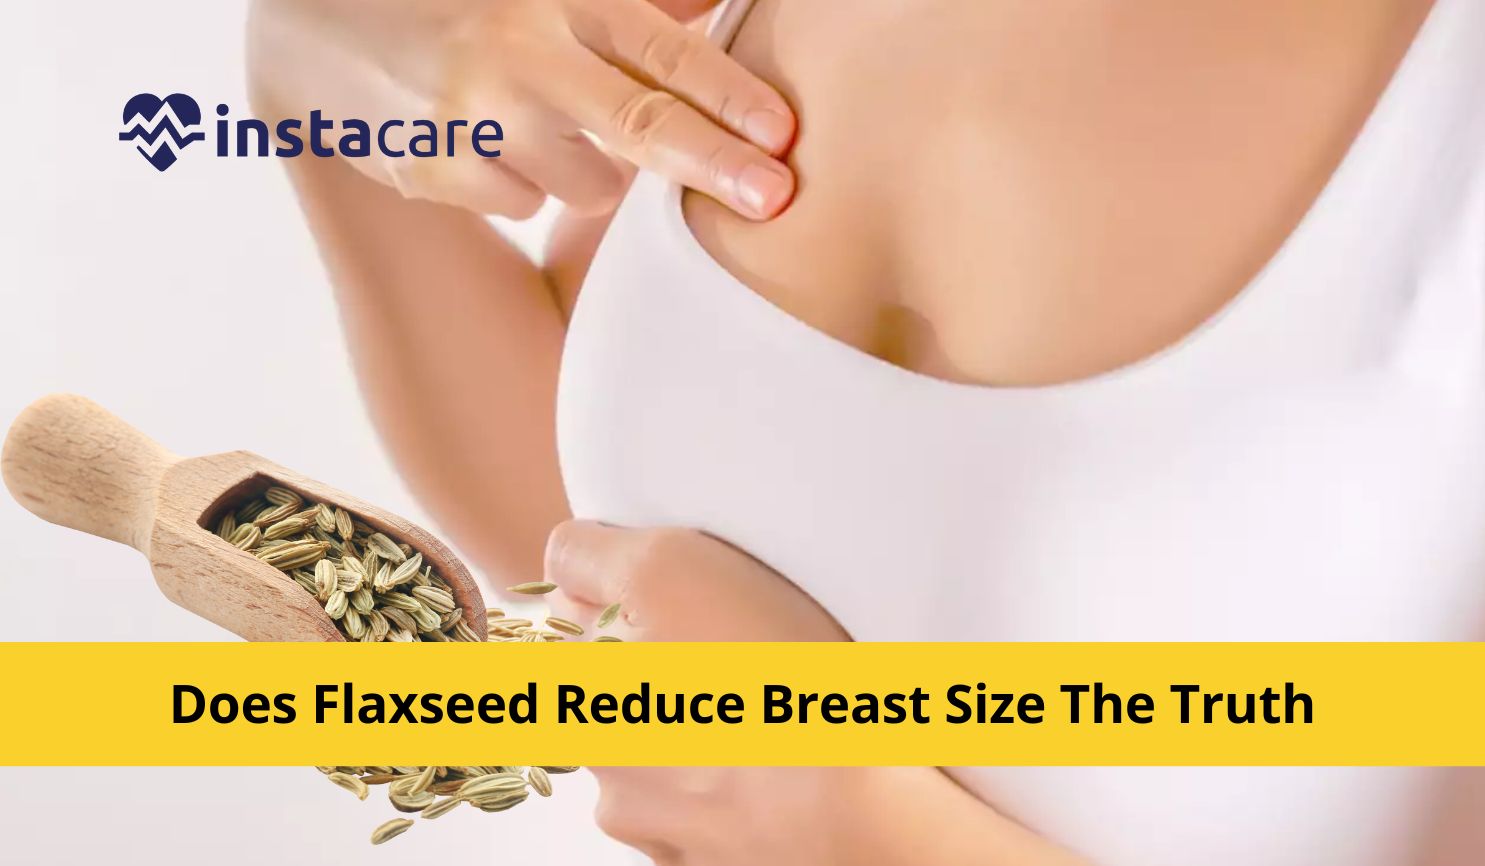 Does Flaxseed Reduce Breast Size? The Truth